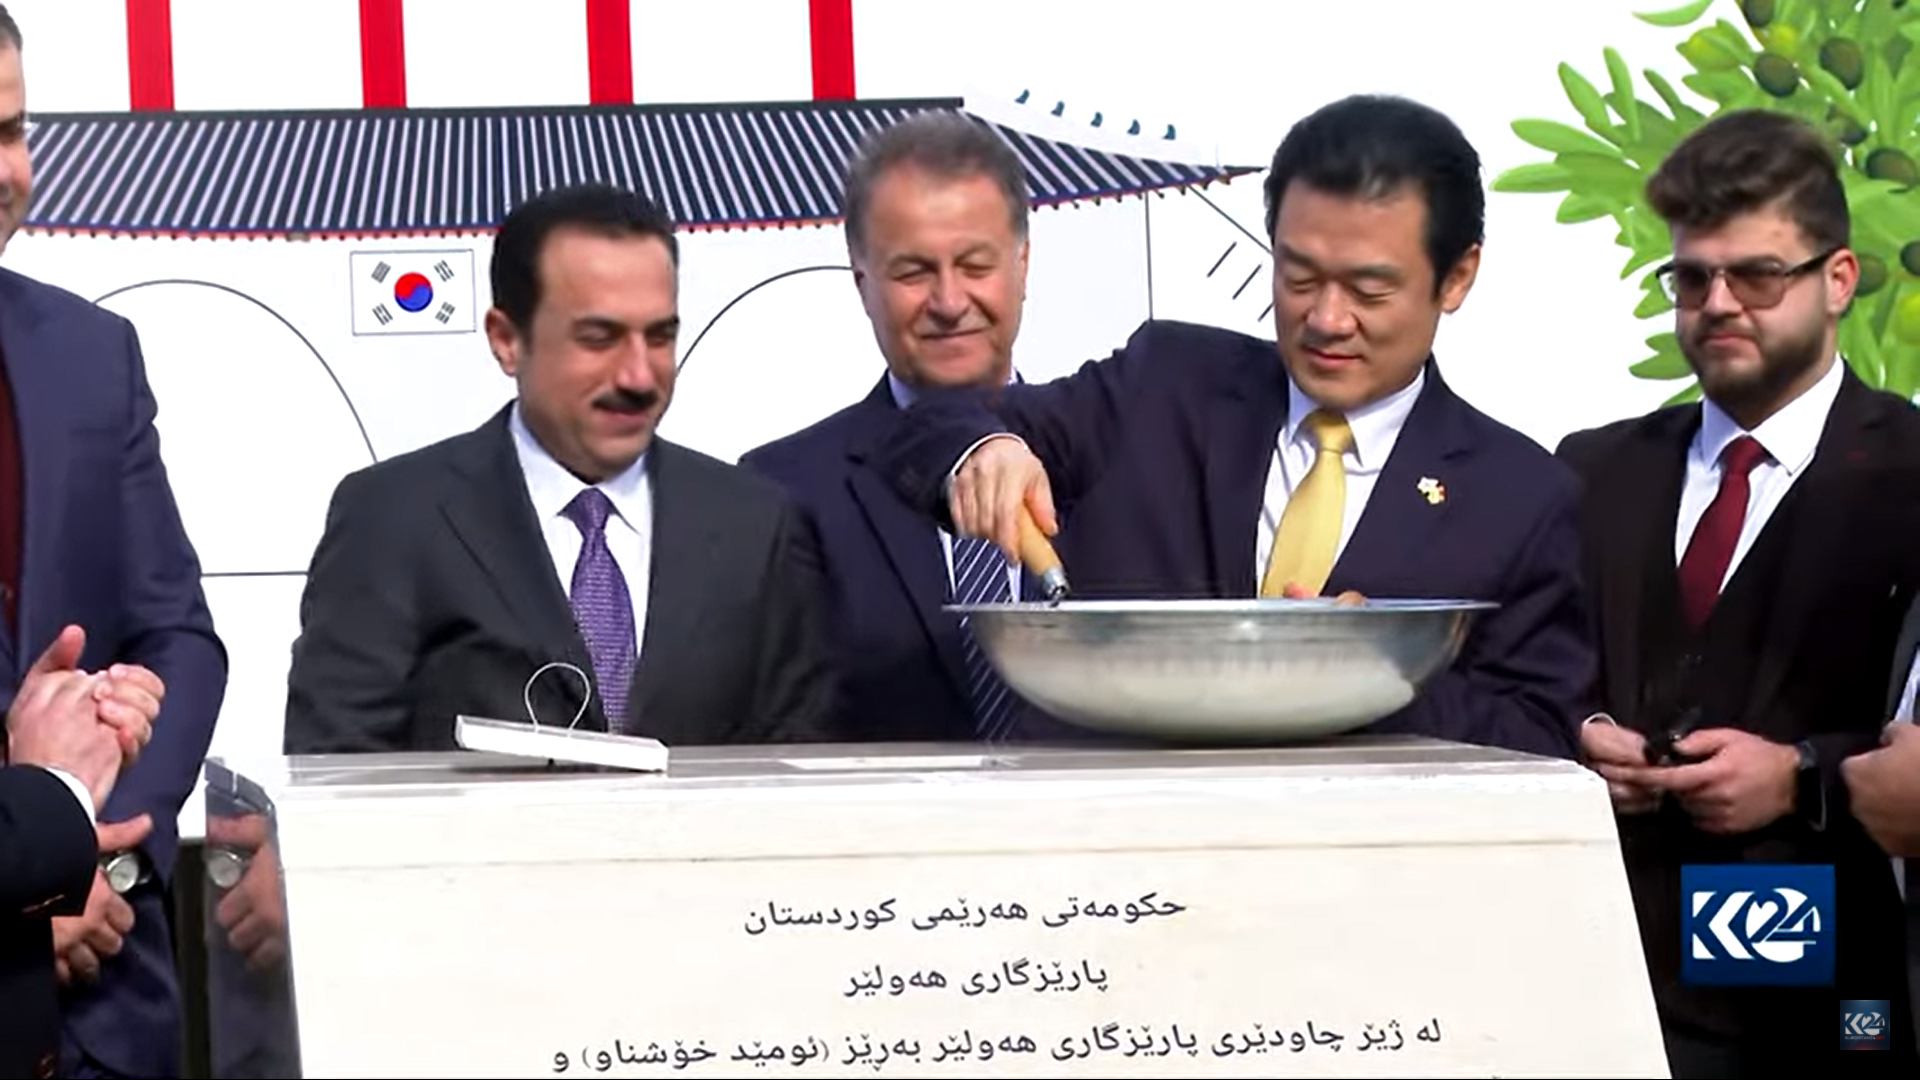 Korea Consul General Kwang-Jin laying the foundation stone for the gate of Zaituna Library project in Erbil with Erbil Governor Omed Khoshnaw, Jan. 25, 2022 (Photo: Kurdistan 24)